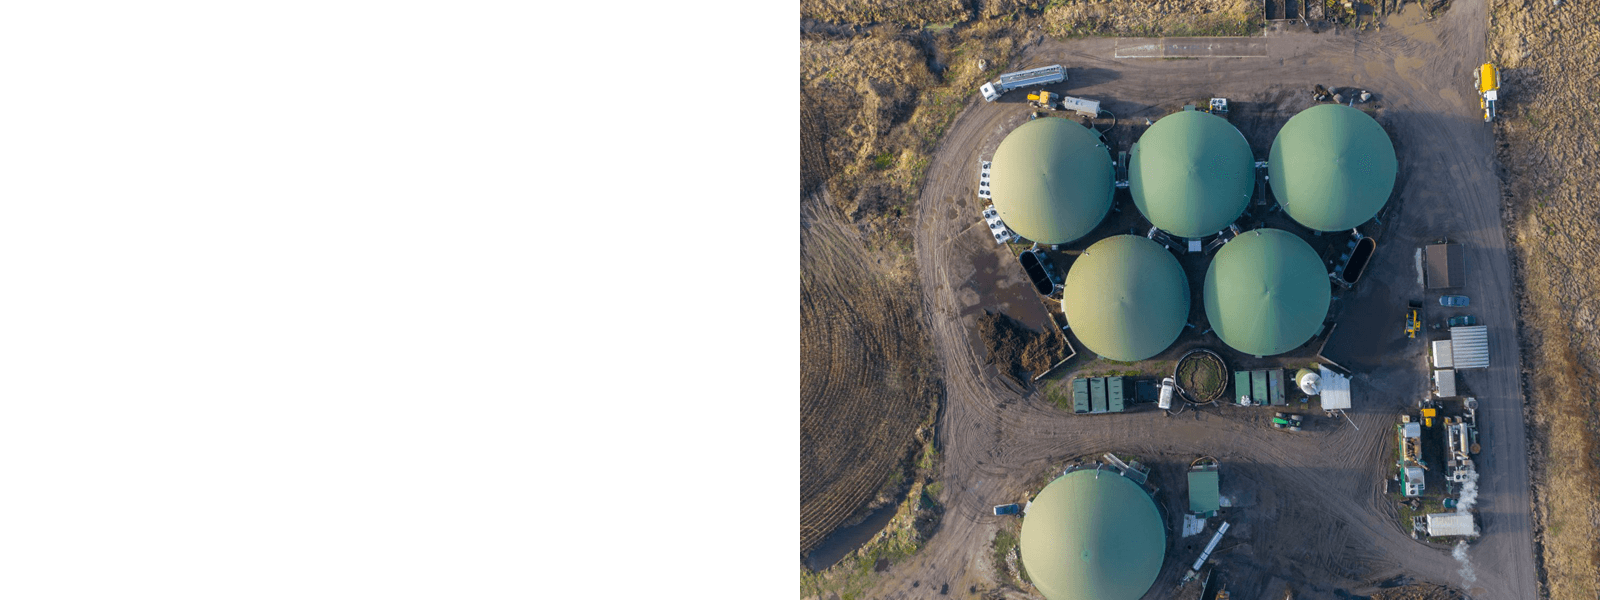 5 Biogas Systems, Wastewater Treatment, and Landfill Gas Systems